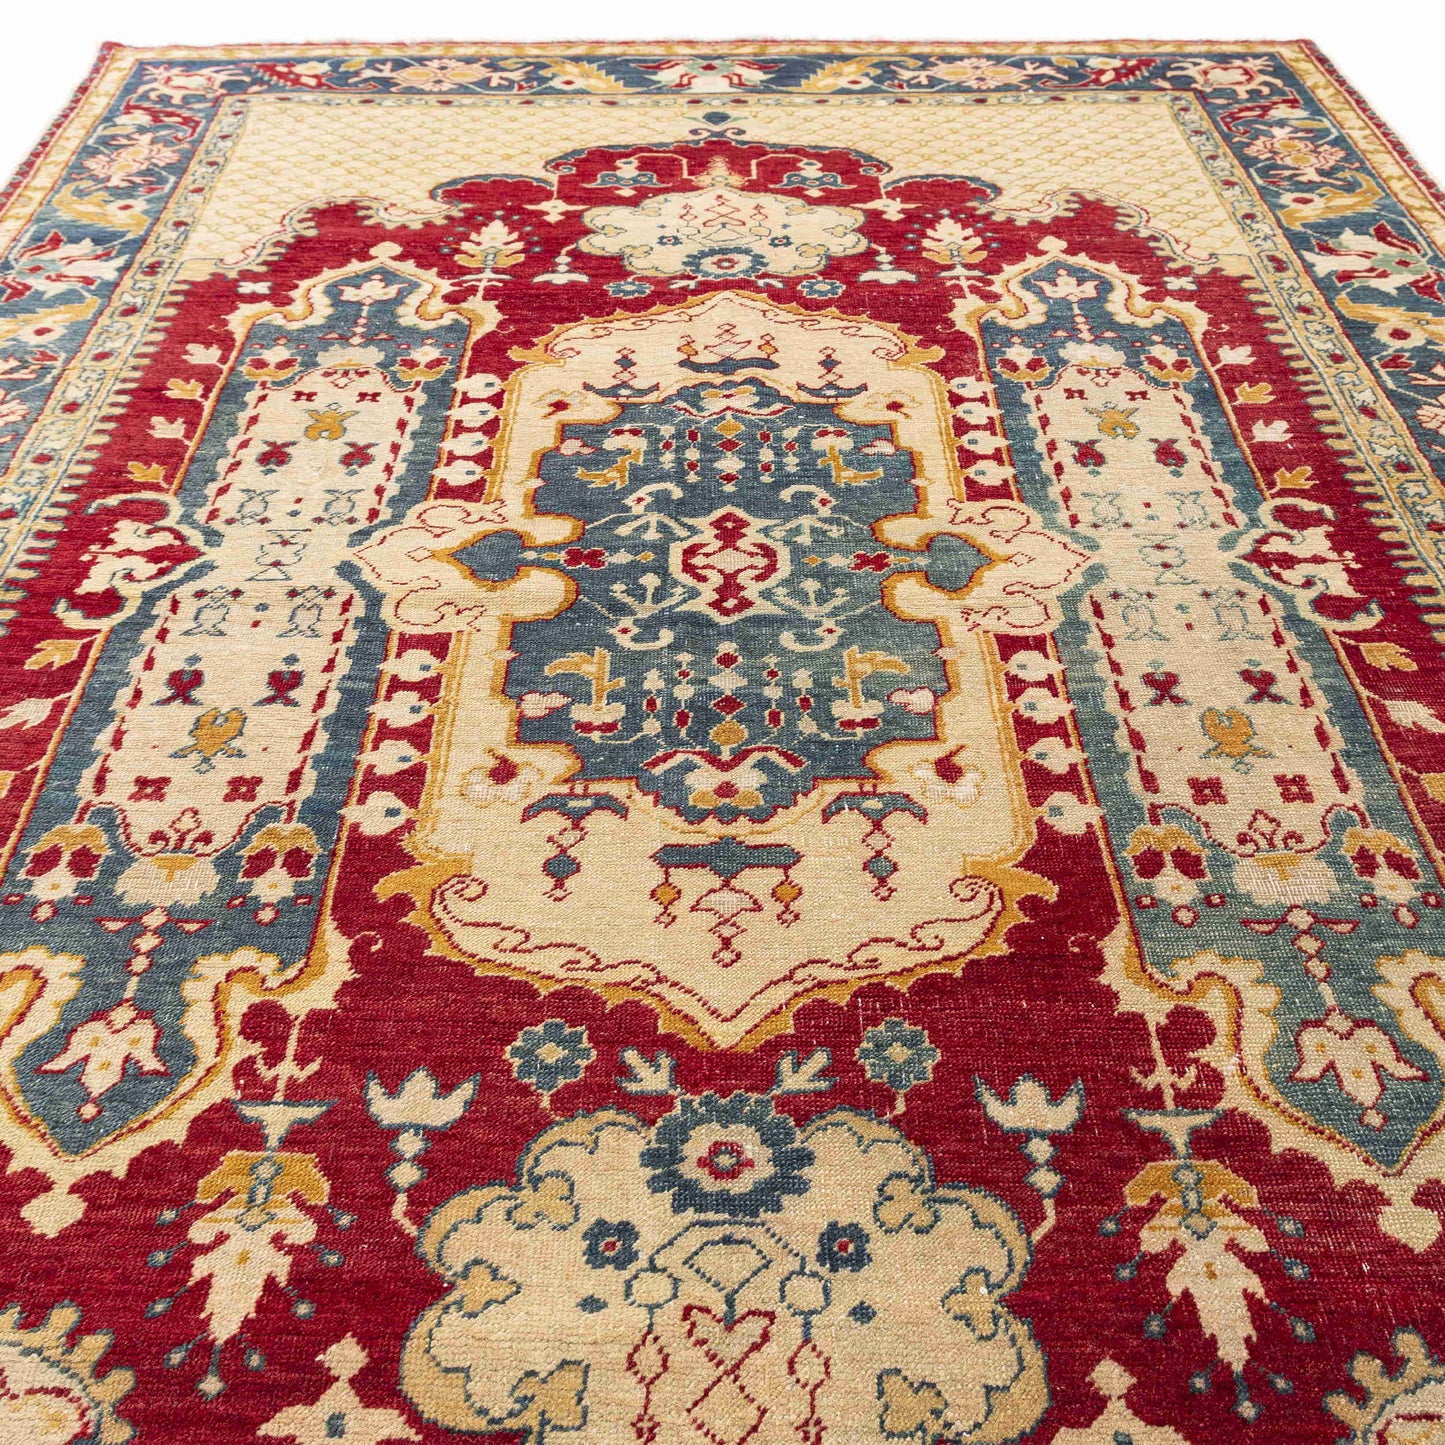 Oriental Rug Anatolian Hand Knotted Wool On Wool 138 X 200 Cm - 4' 7'' X 6' 7'' Red C014 ER01